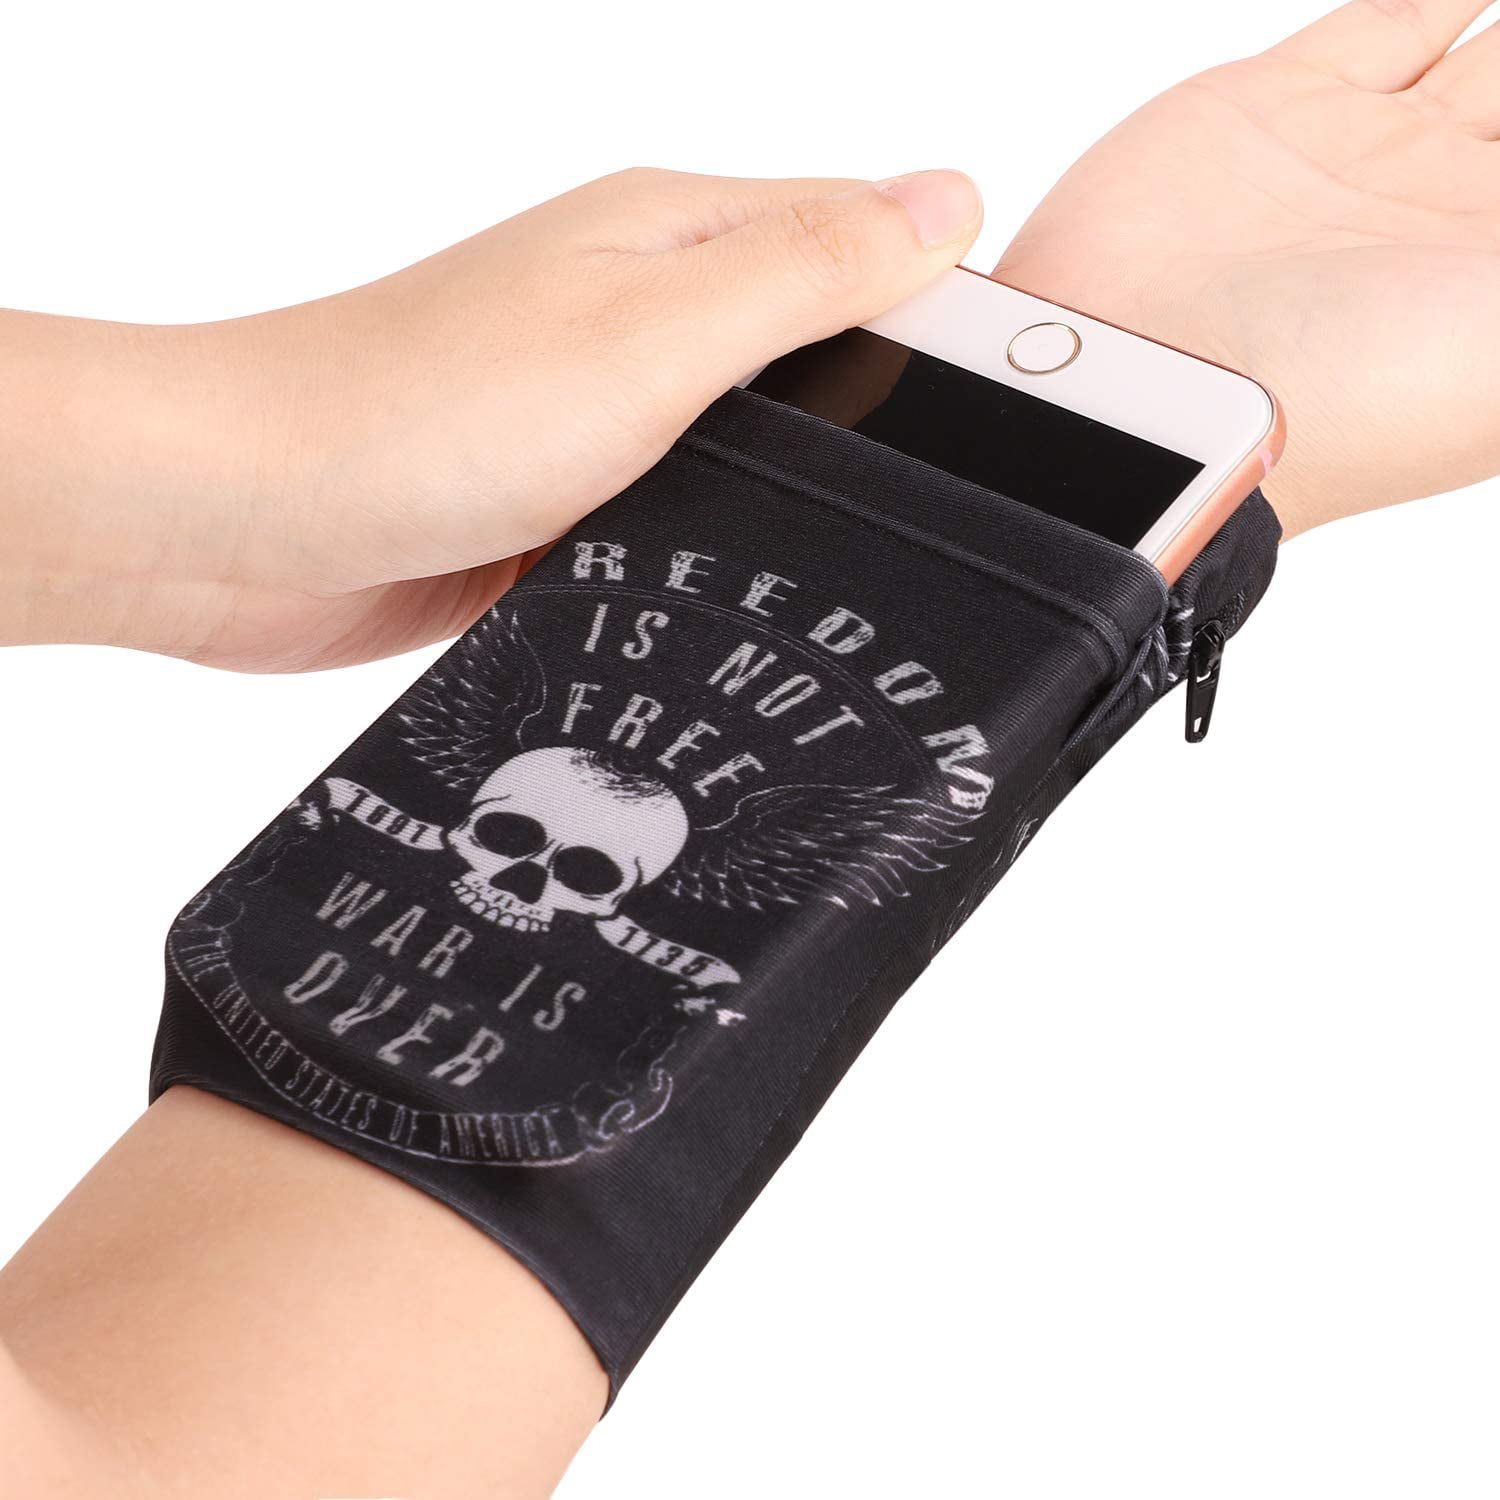 Ankle Wallet Hidden Pouch Armband Sweat Bands Running Pouch 2 Pocket Wrist Wallet Wrist Cell Phone Holder Wristlet Wallet for Travel 